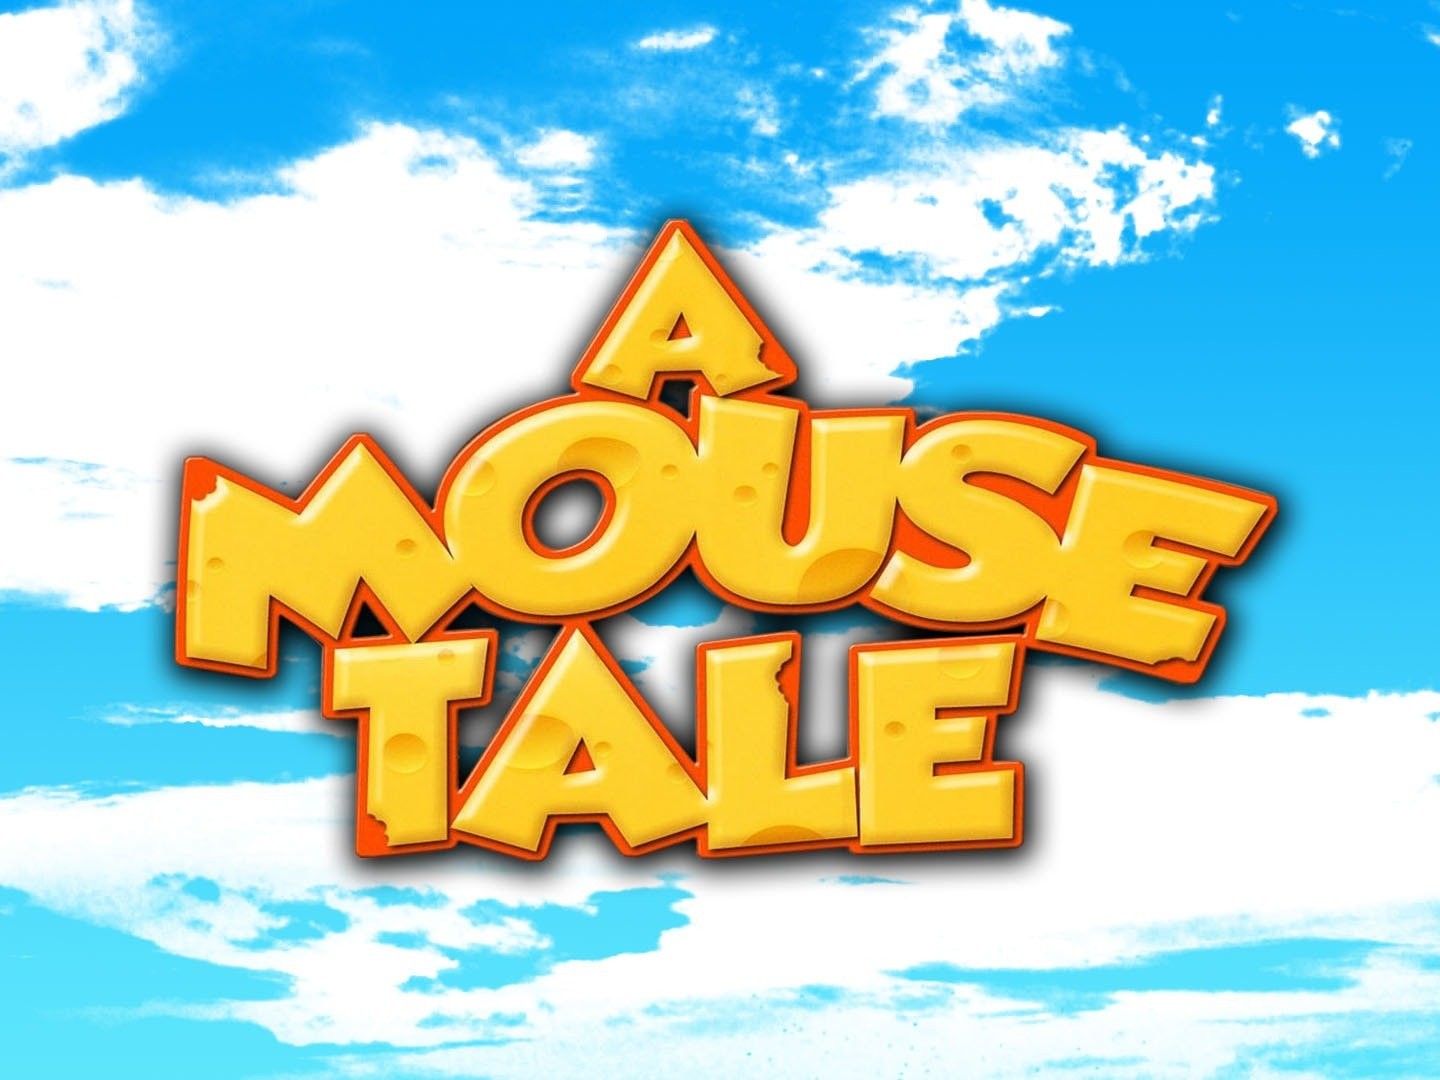 A Mouse Tale - Movies on Google Play